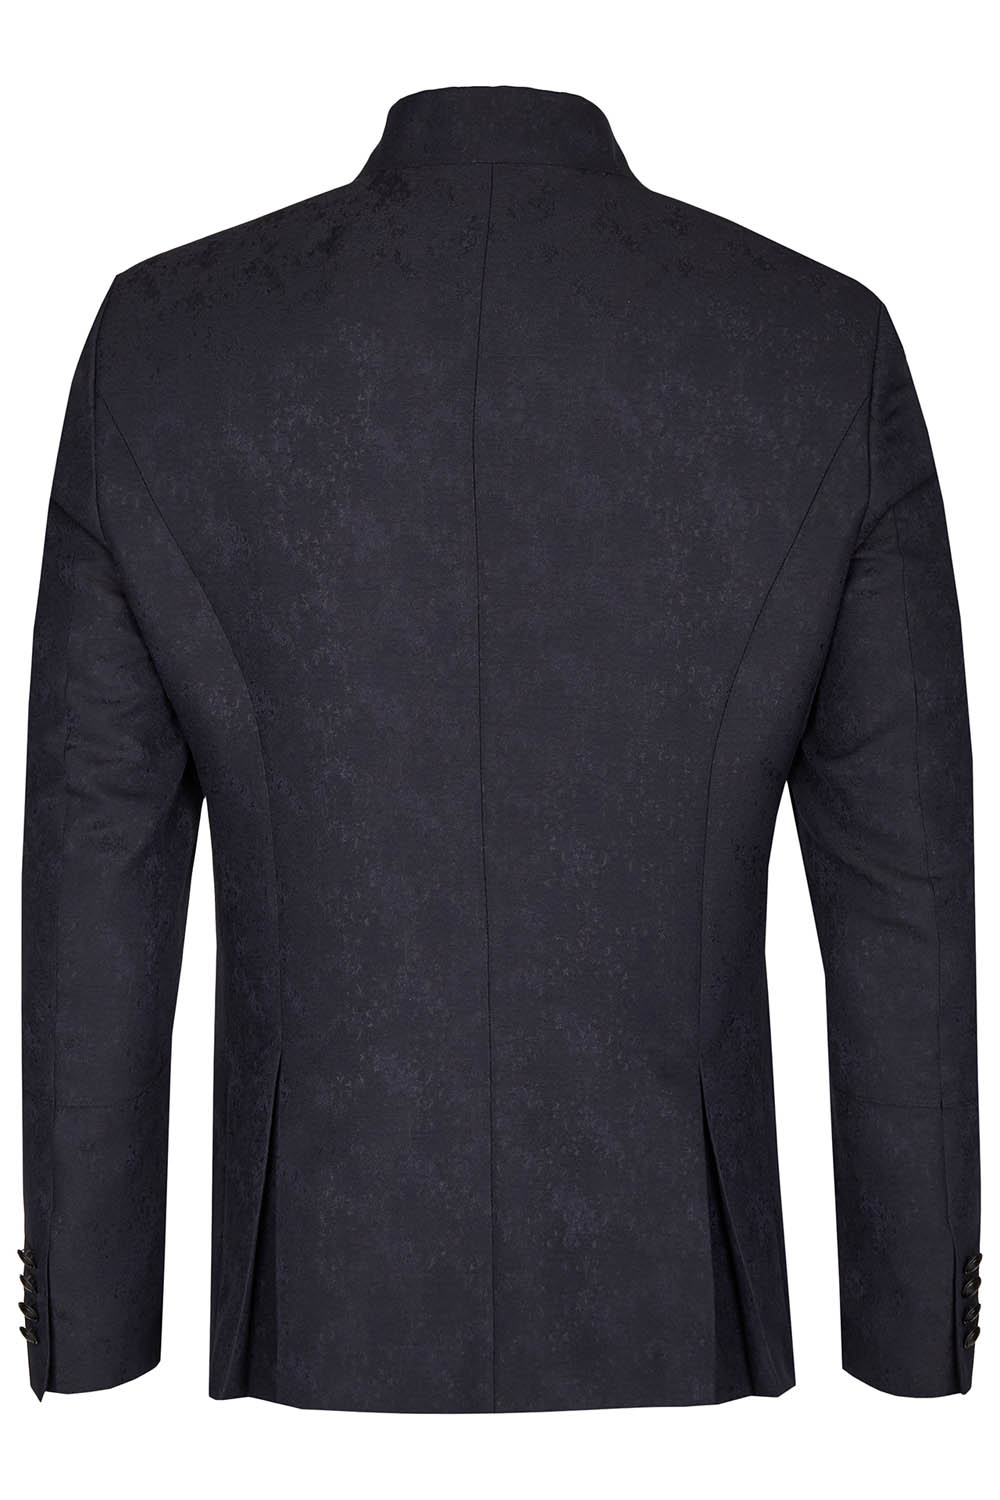 Royal Black 3 Piece Suit - Tom Murphy's Formal and Menswear